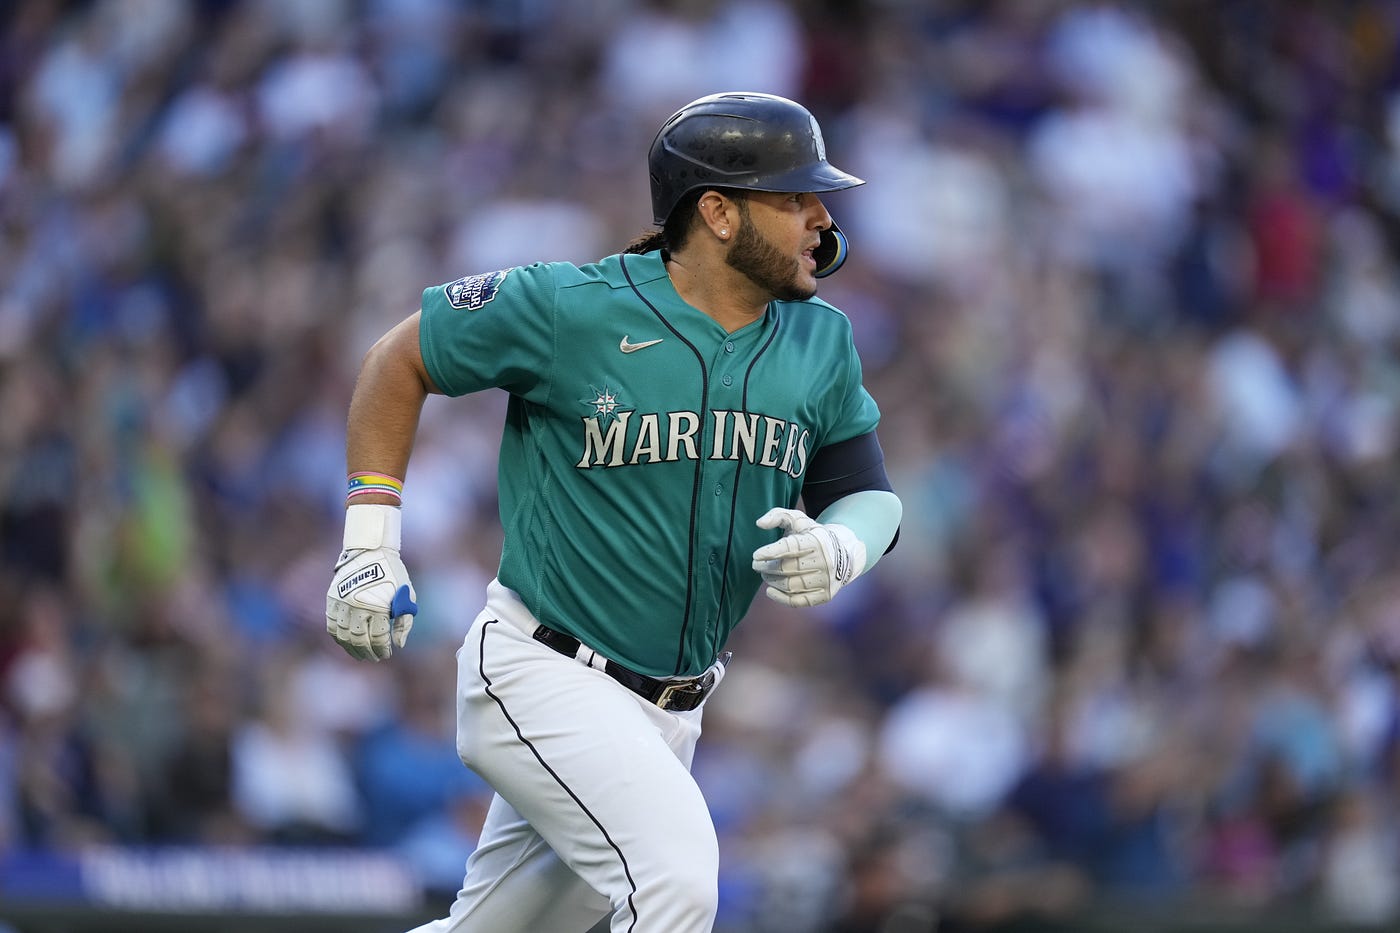 Mariners Game Notes — July 7 at Houston, by Mariners PR